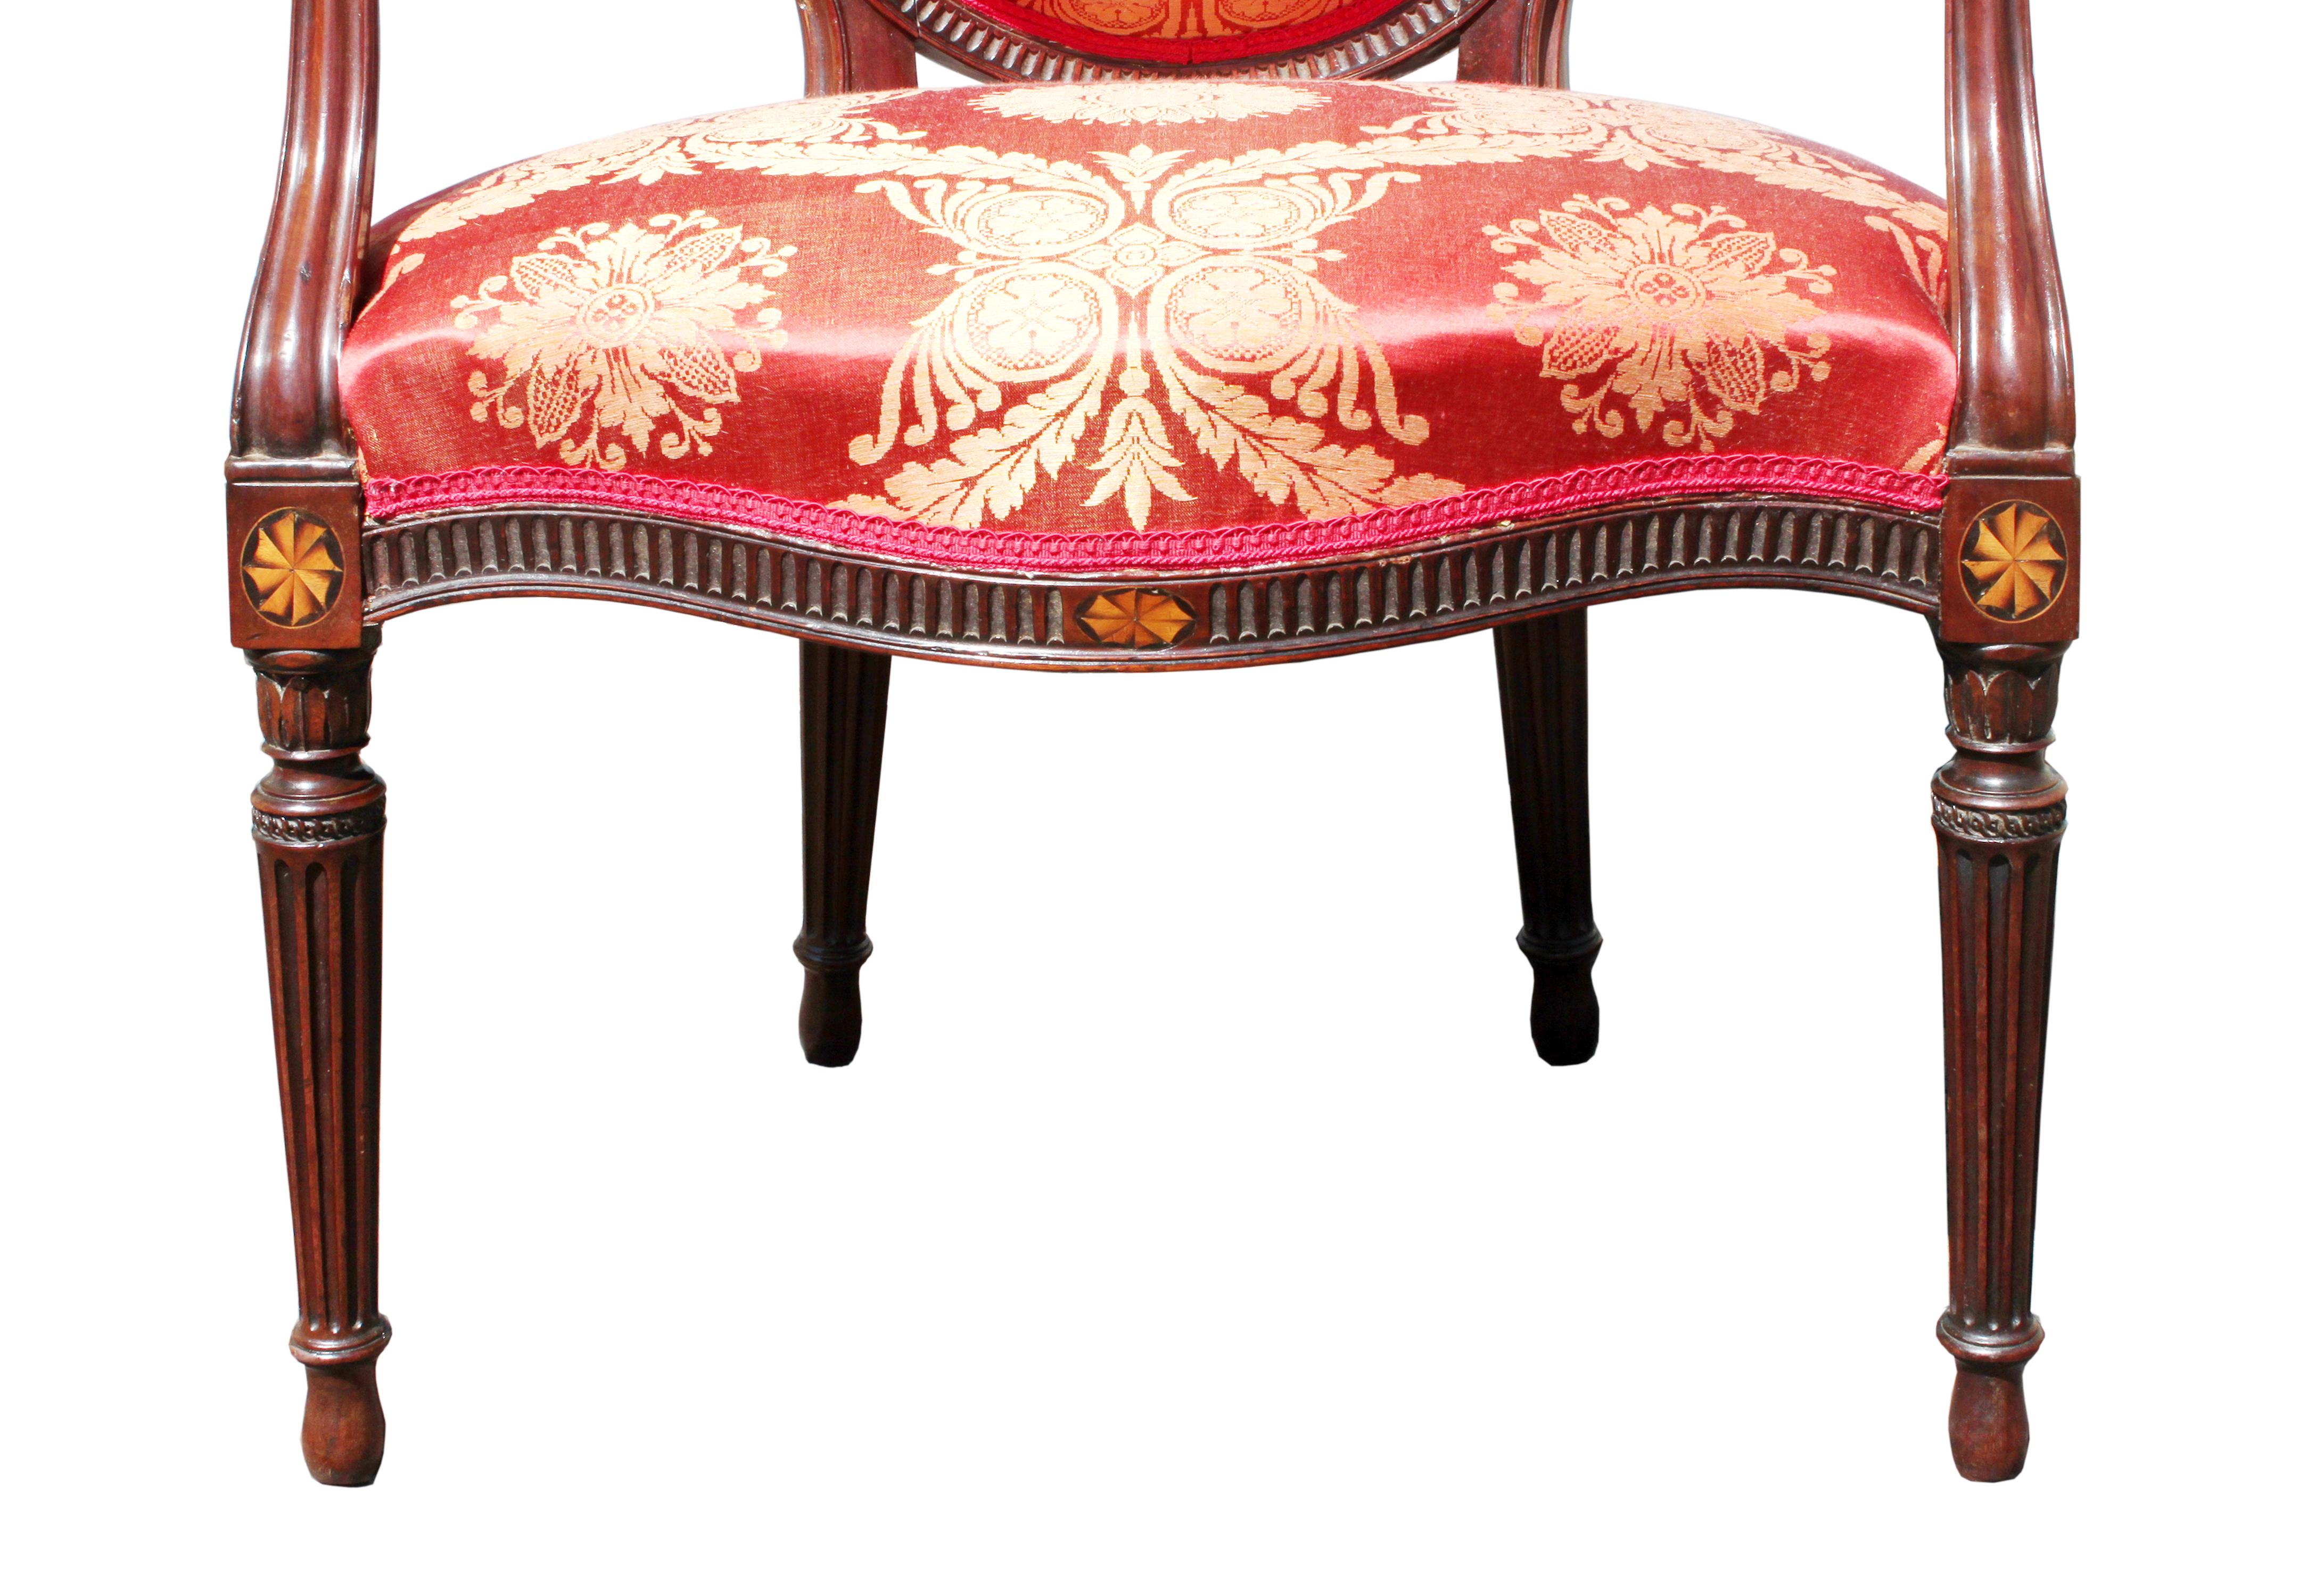 Pair of George III Mahogany Armchairs in Red Damask; Manner of John Linnell For Sale 1